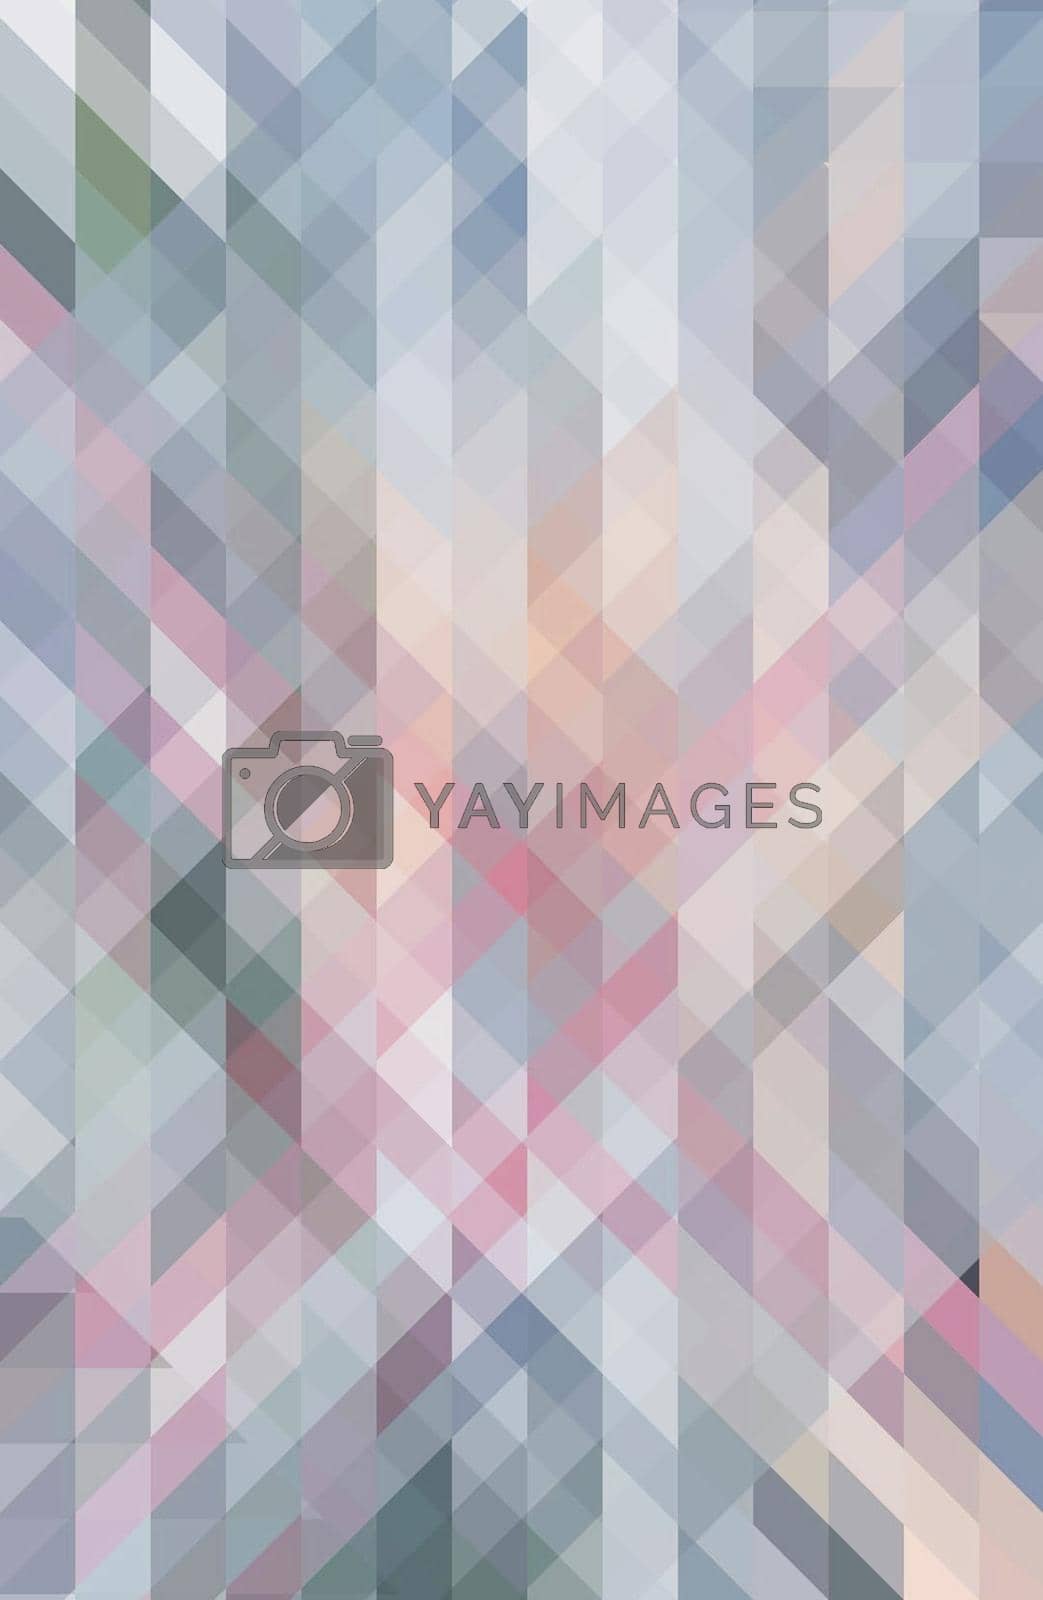 Royalty free image of Pattern Background  perfect for wrappers, wallpapers, postcards, greeting cards, wedding invitations, romantic events. by TravelSync27